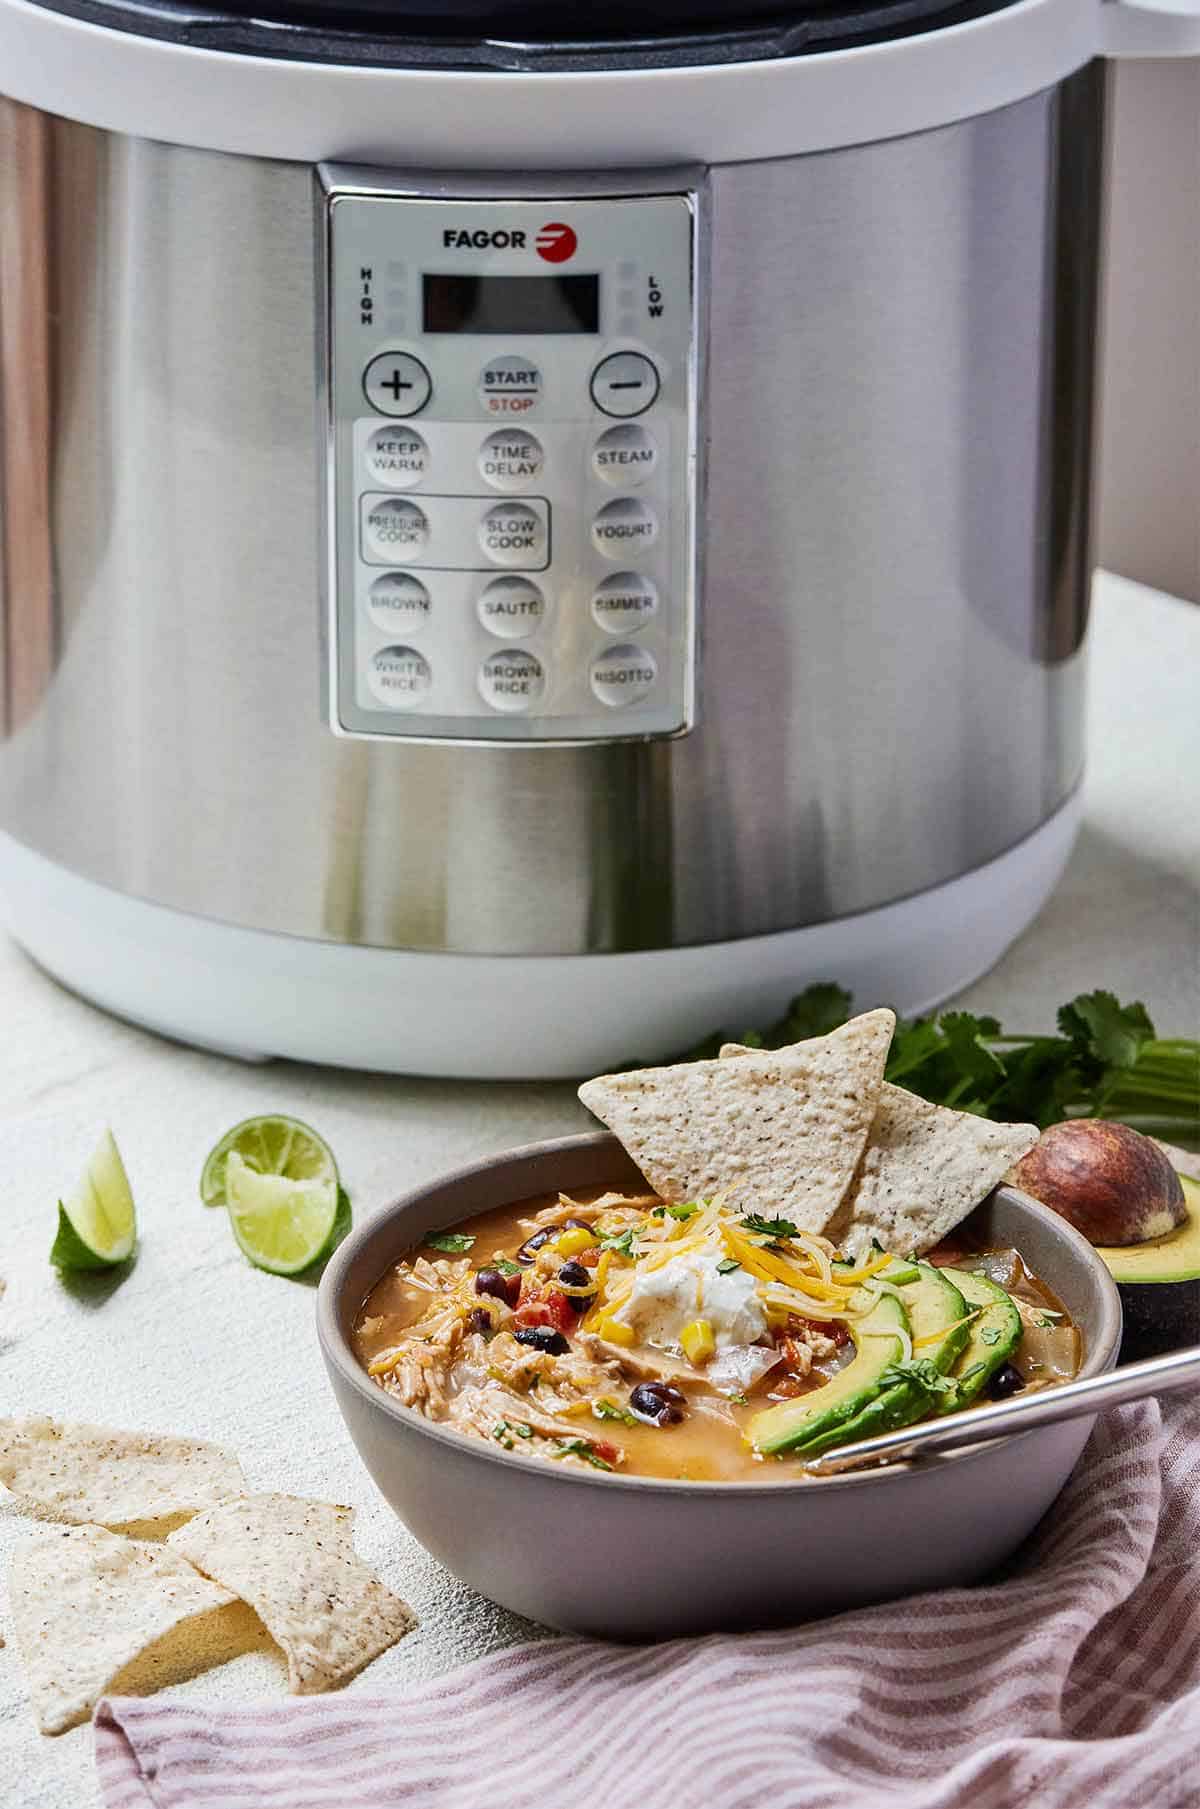 A bowl of chicken tortilla soup topped with chips and avocado in front of a pressure cooker.